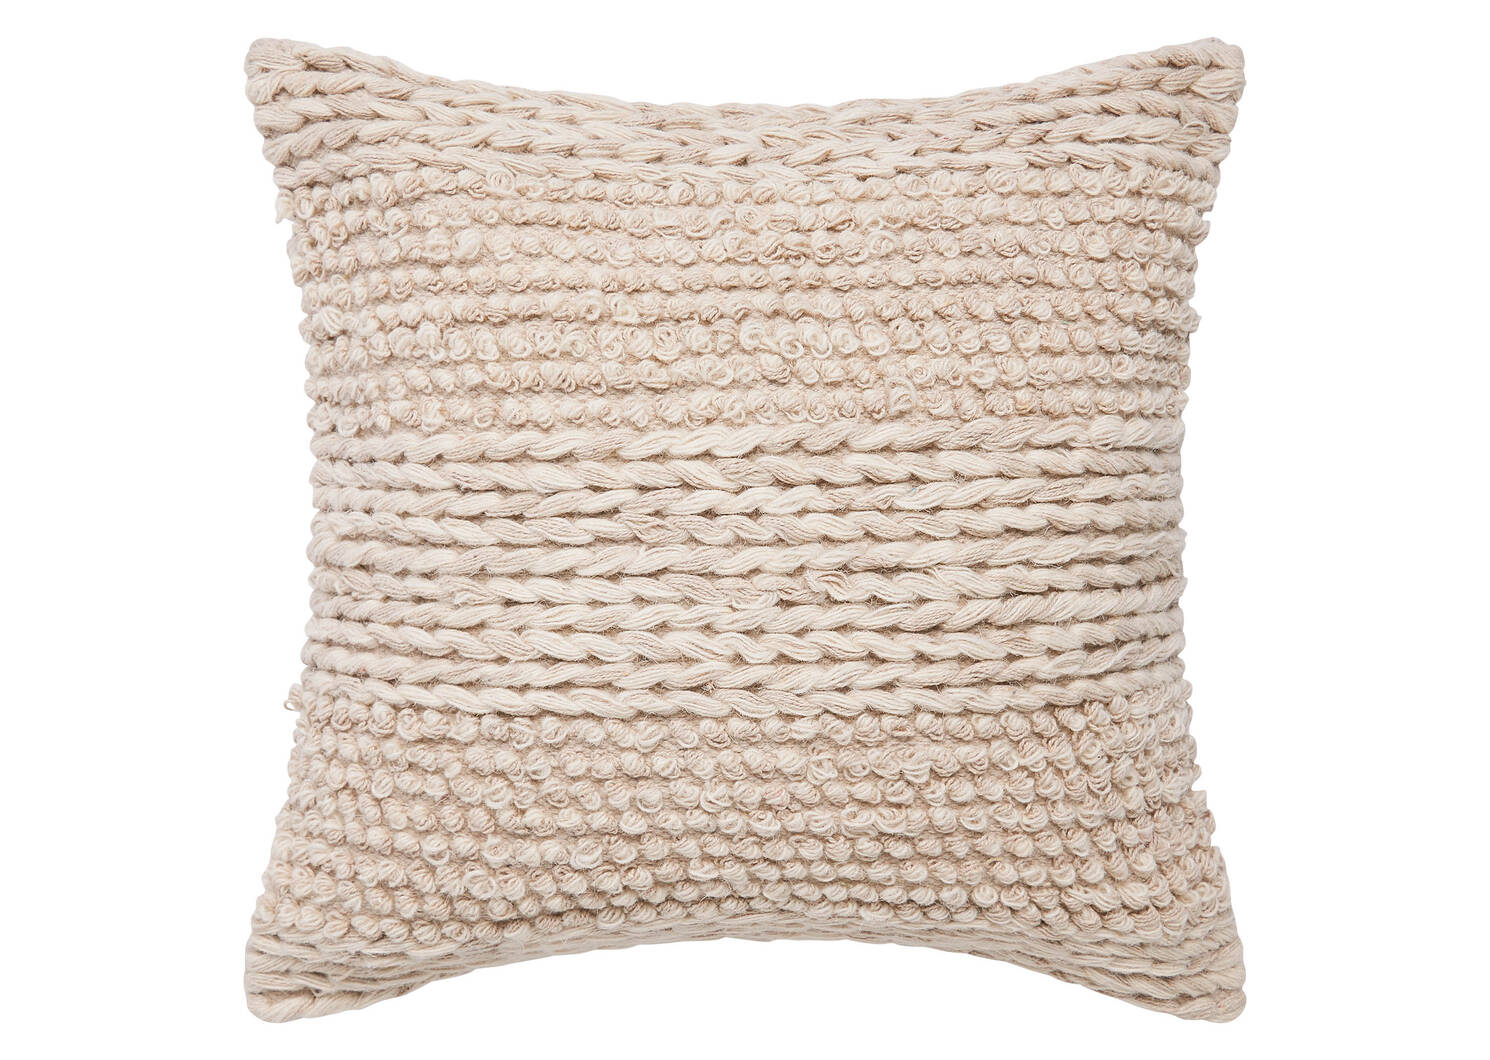 Coussin Inala 20x20 lait